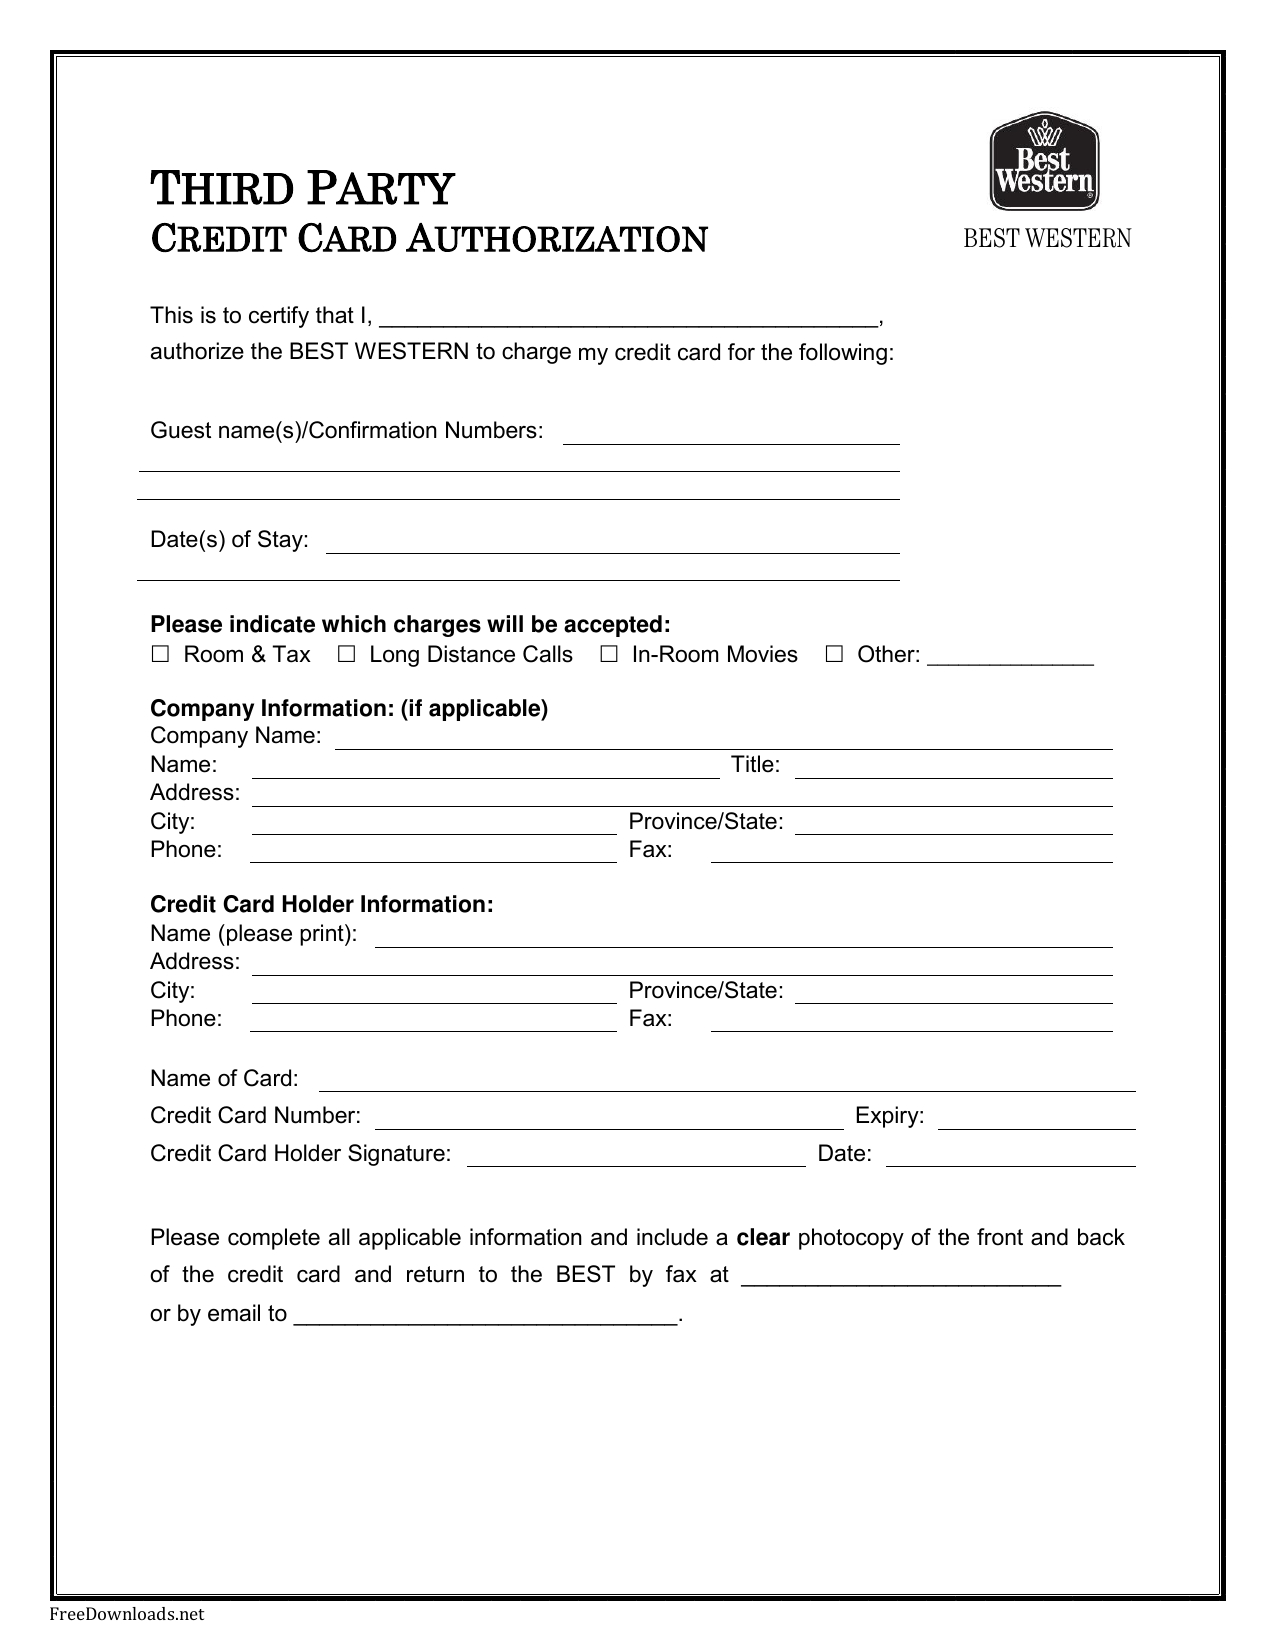 Download Best Western Credit Card Authorization Form In Credit Card Payment Slip Template